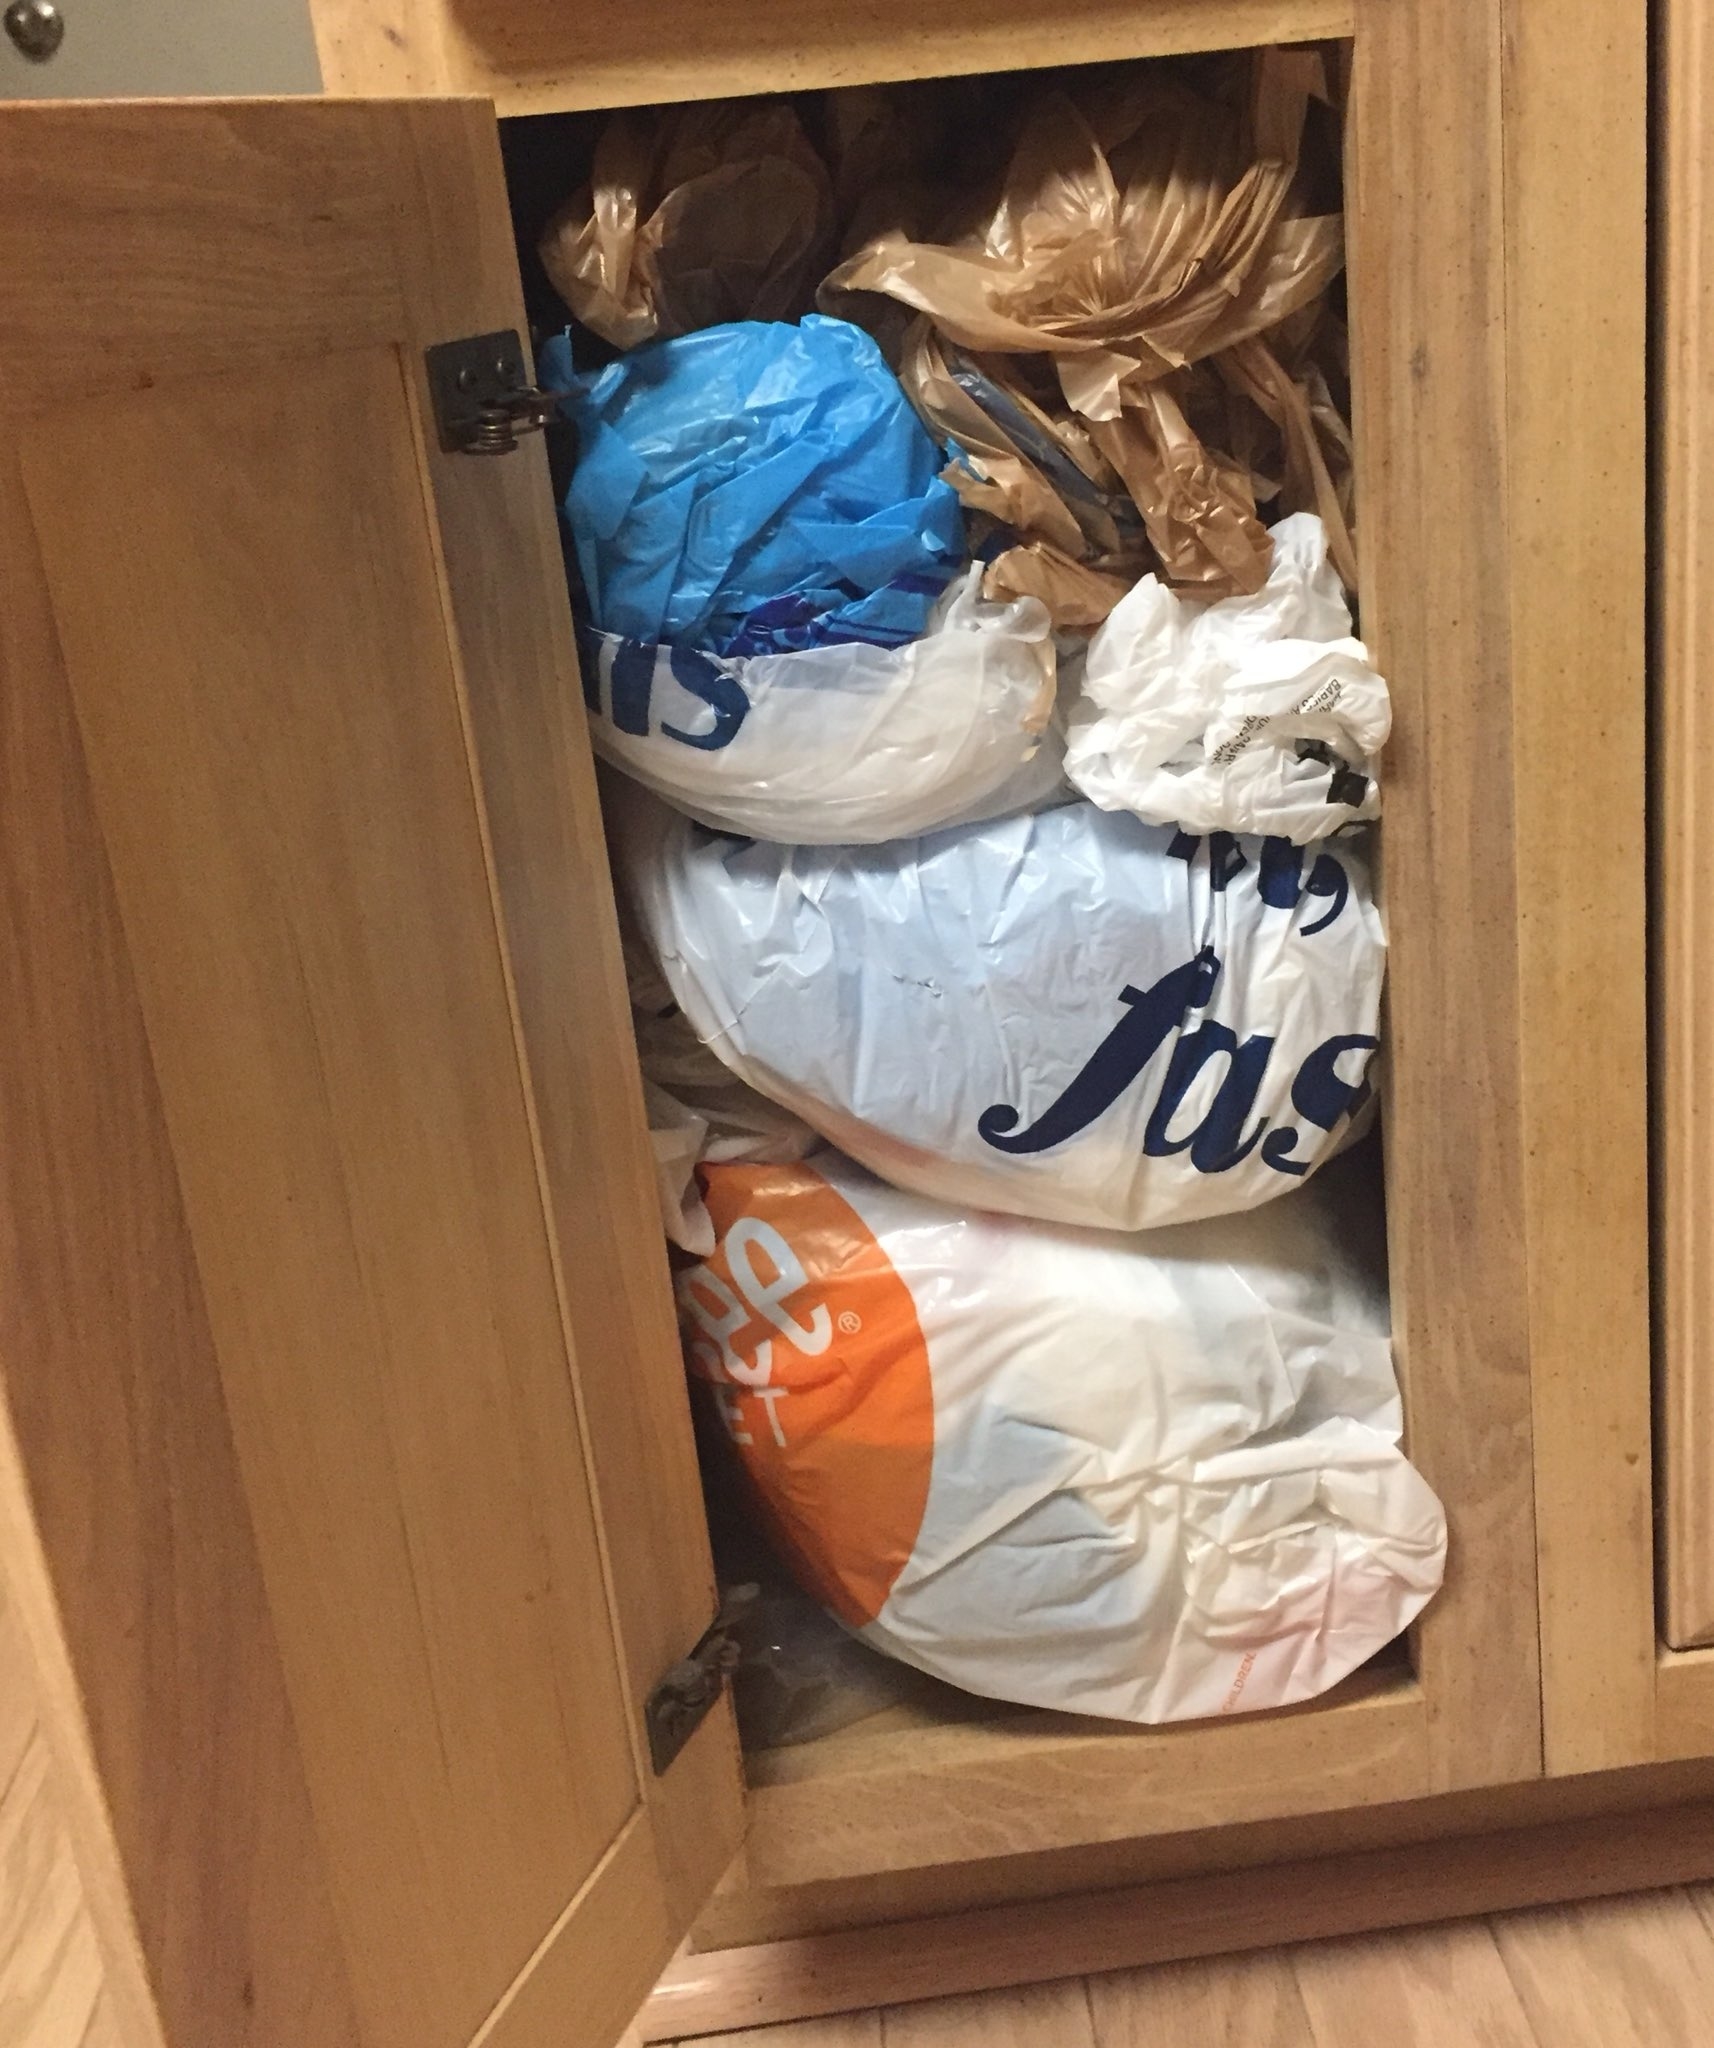 A cabinet stuffed with plastic bags inside each other